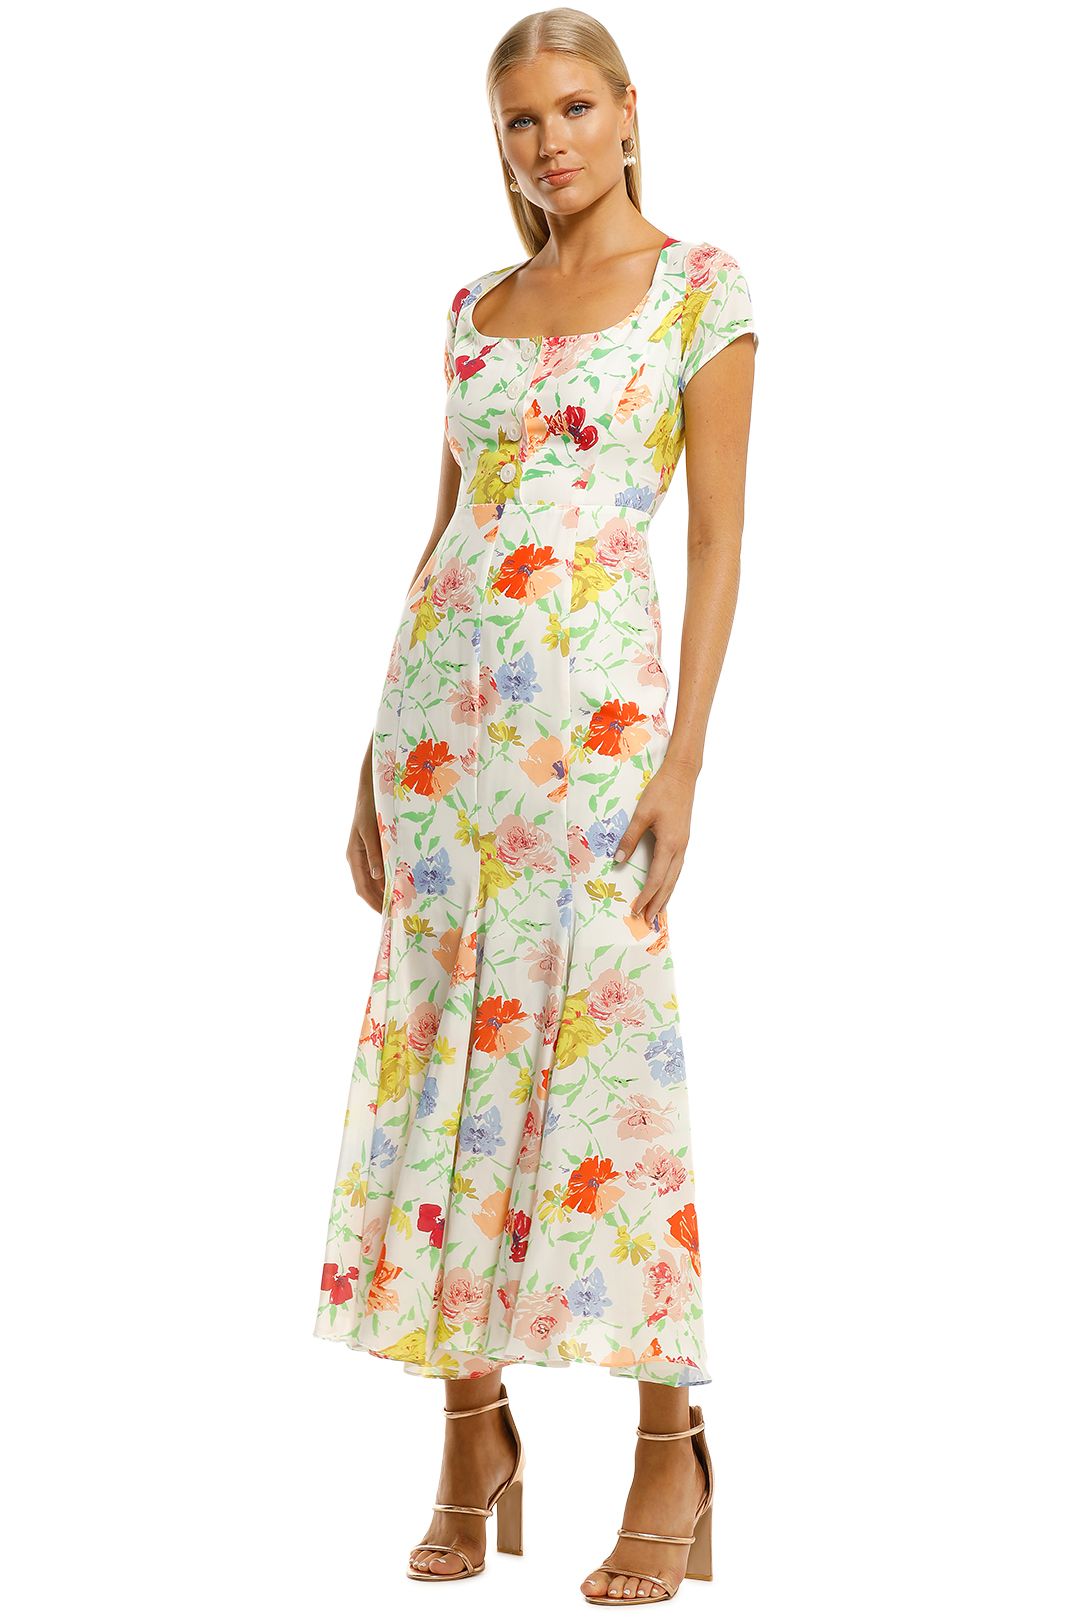 alice mccall yellow floral dress